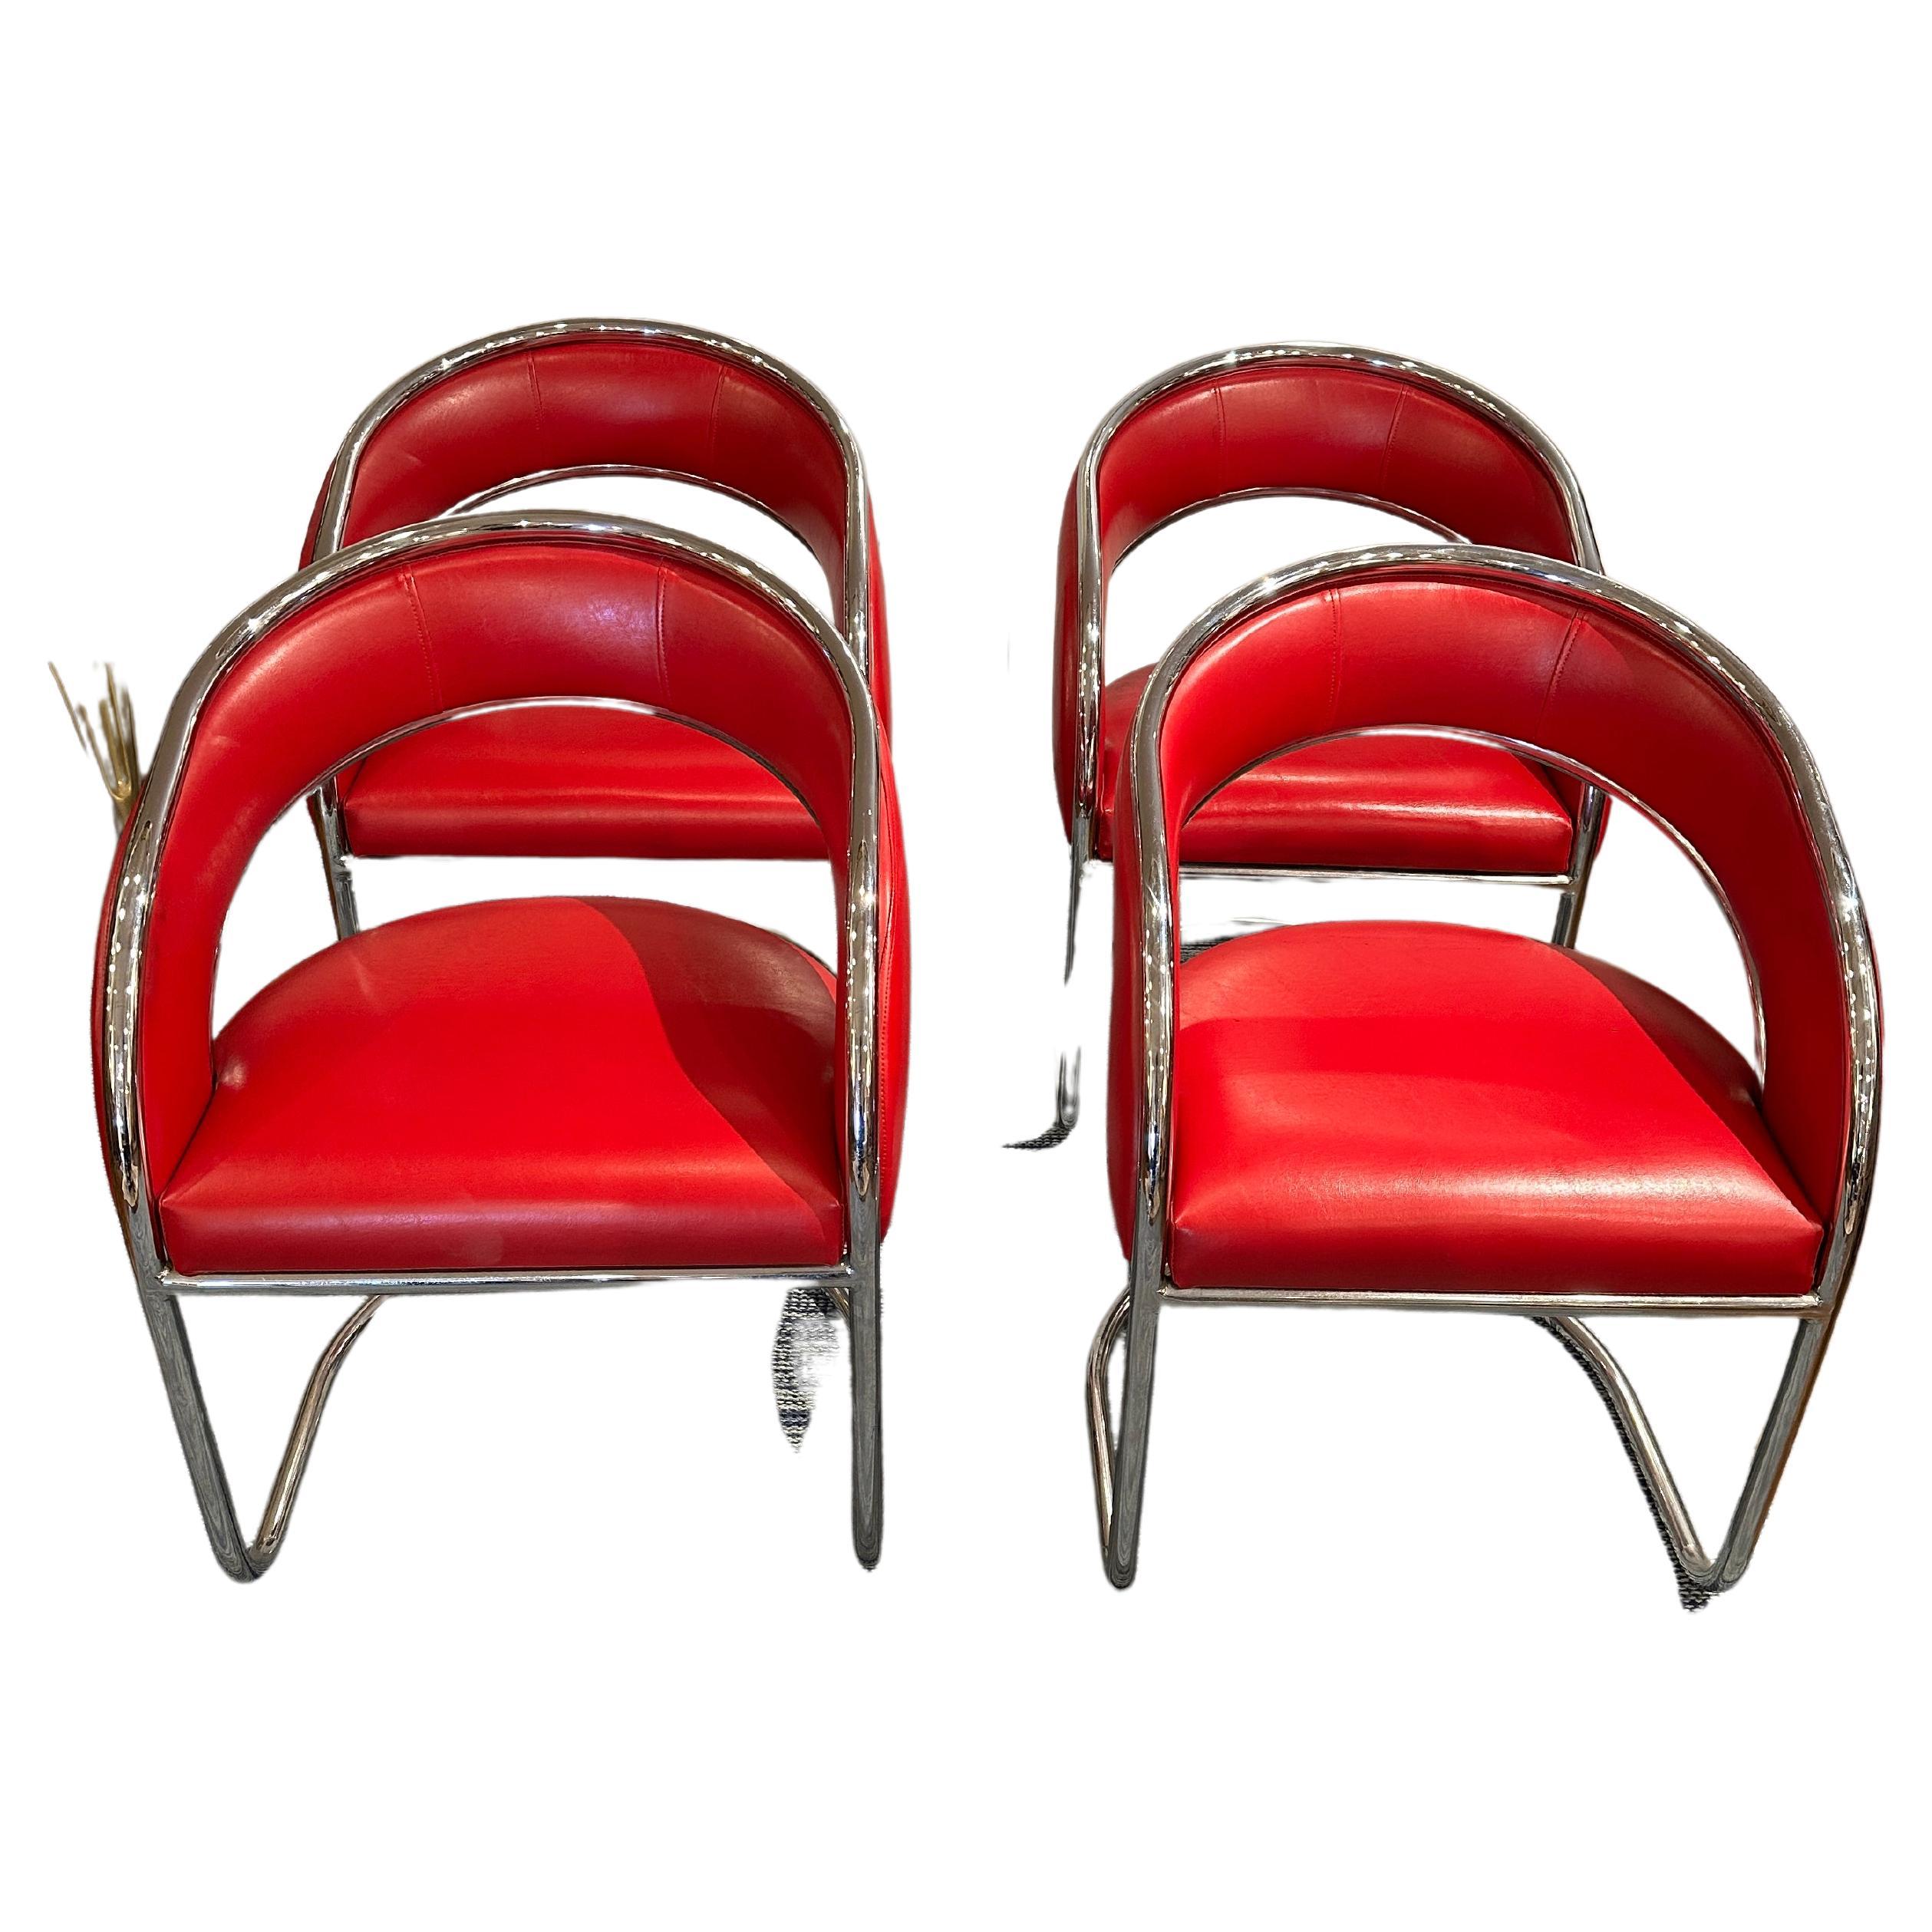 Set of 4 Red Leather Lounge Chairs, Mid Century  For Sale